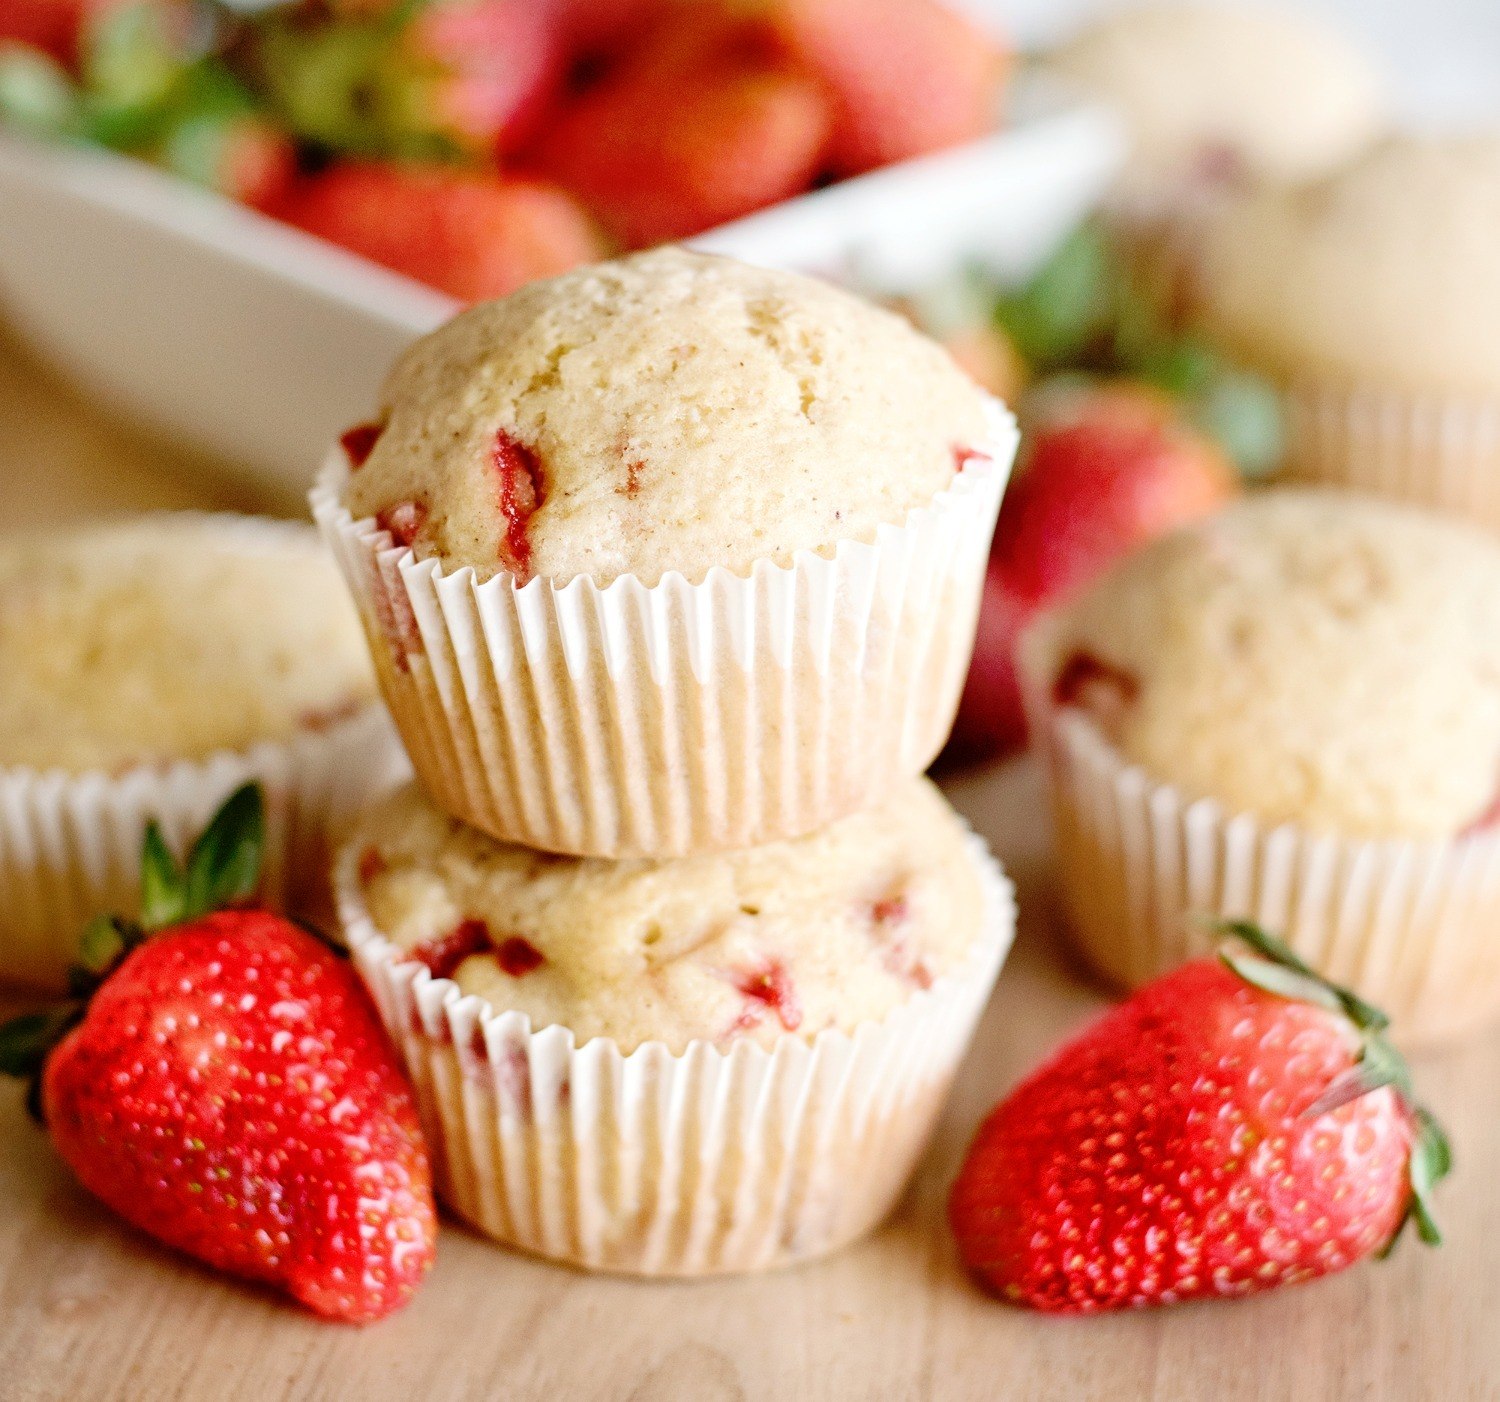 Keto Strawberry Muffins- Make Ahead- ONLY 2 Net Carbs per Muffin!